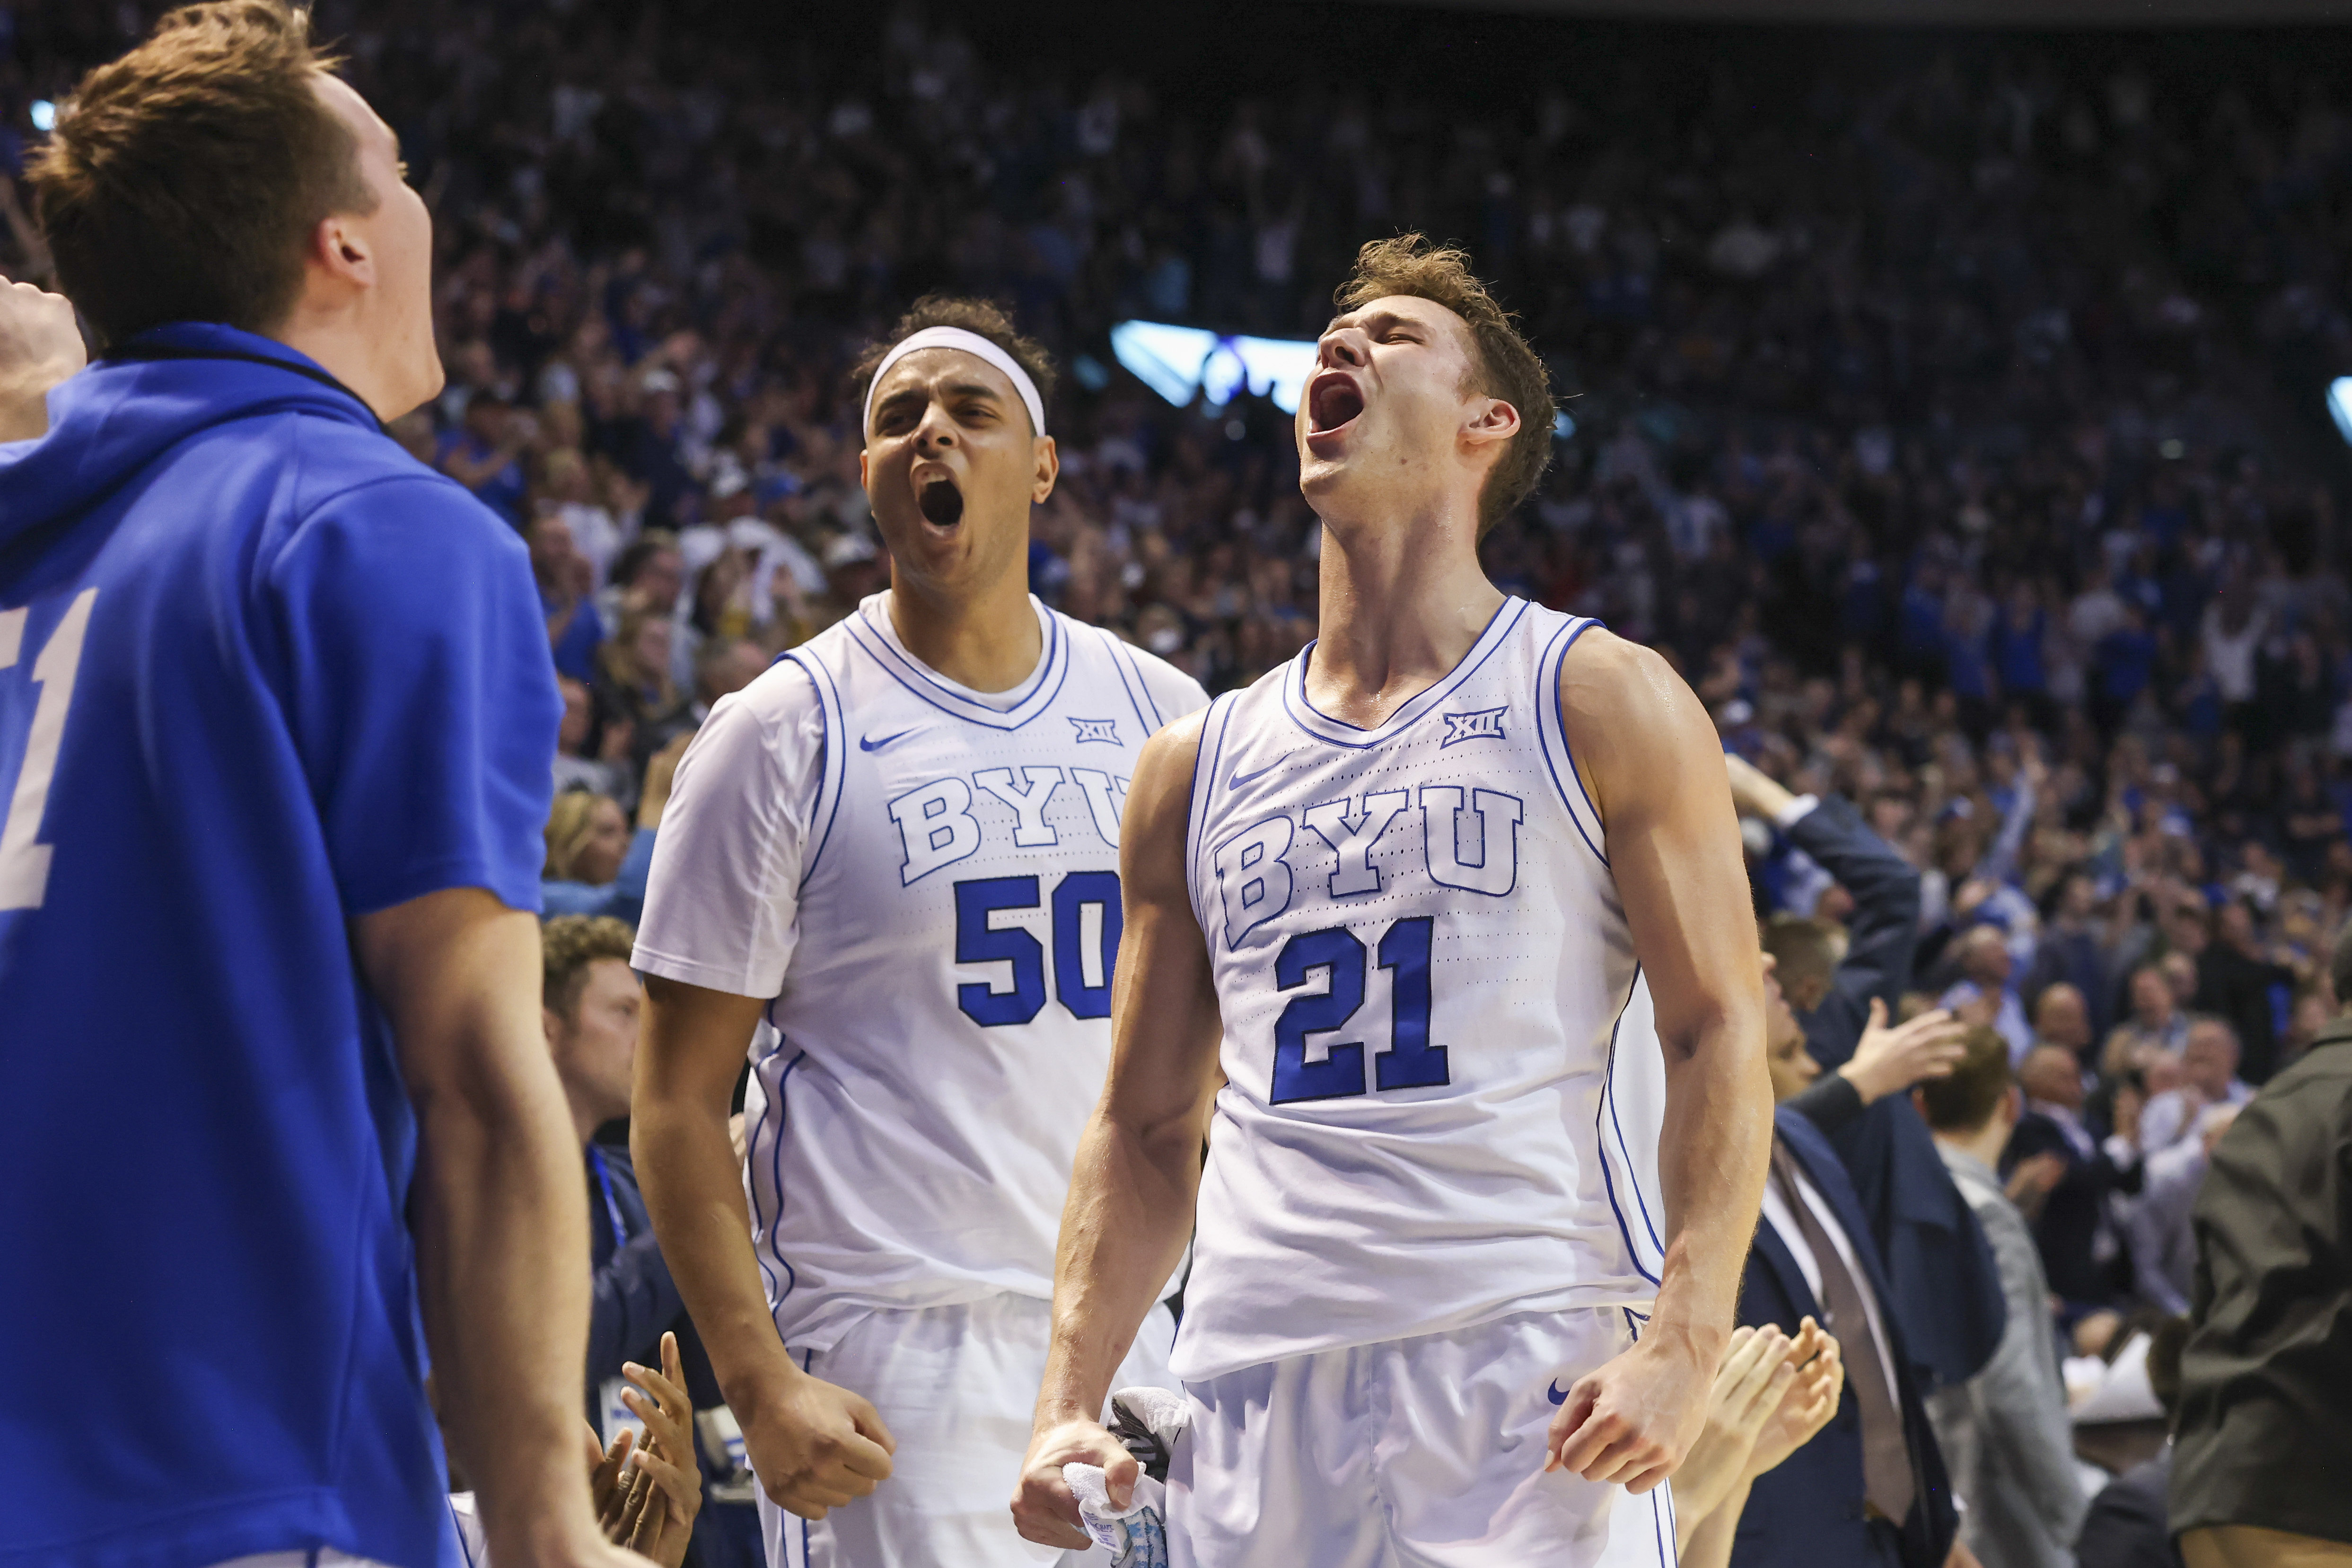 Brigham Young Cougars center Aly Khalifa and guard Trevin Knell react to a play against the Baylor Bears during the second half at Marriott Center.